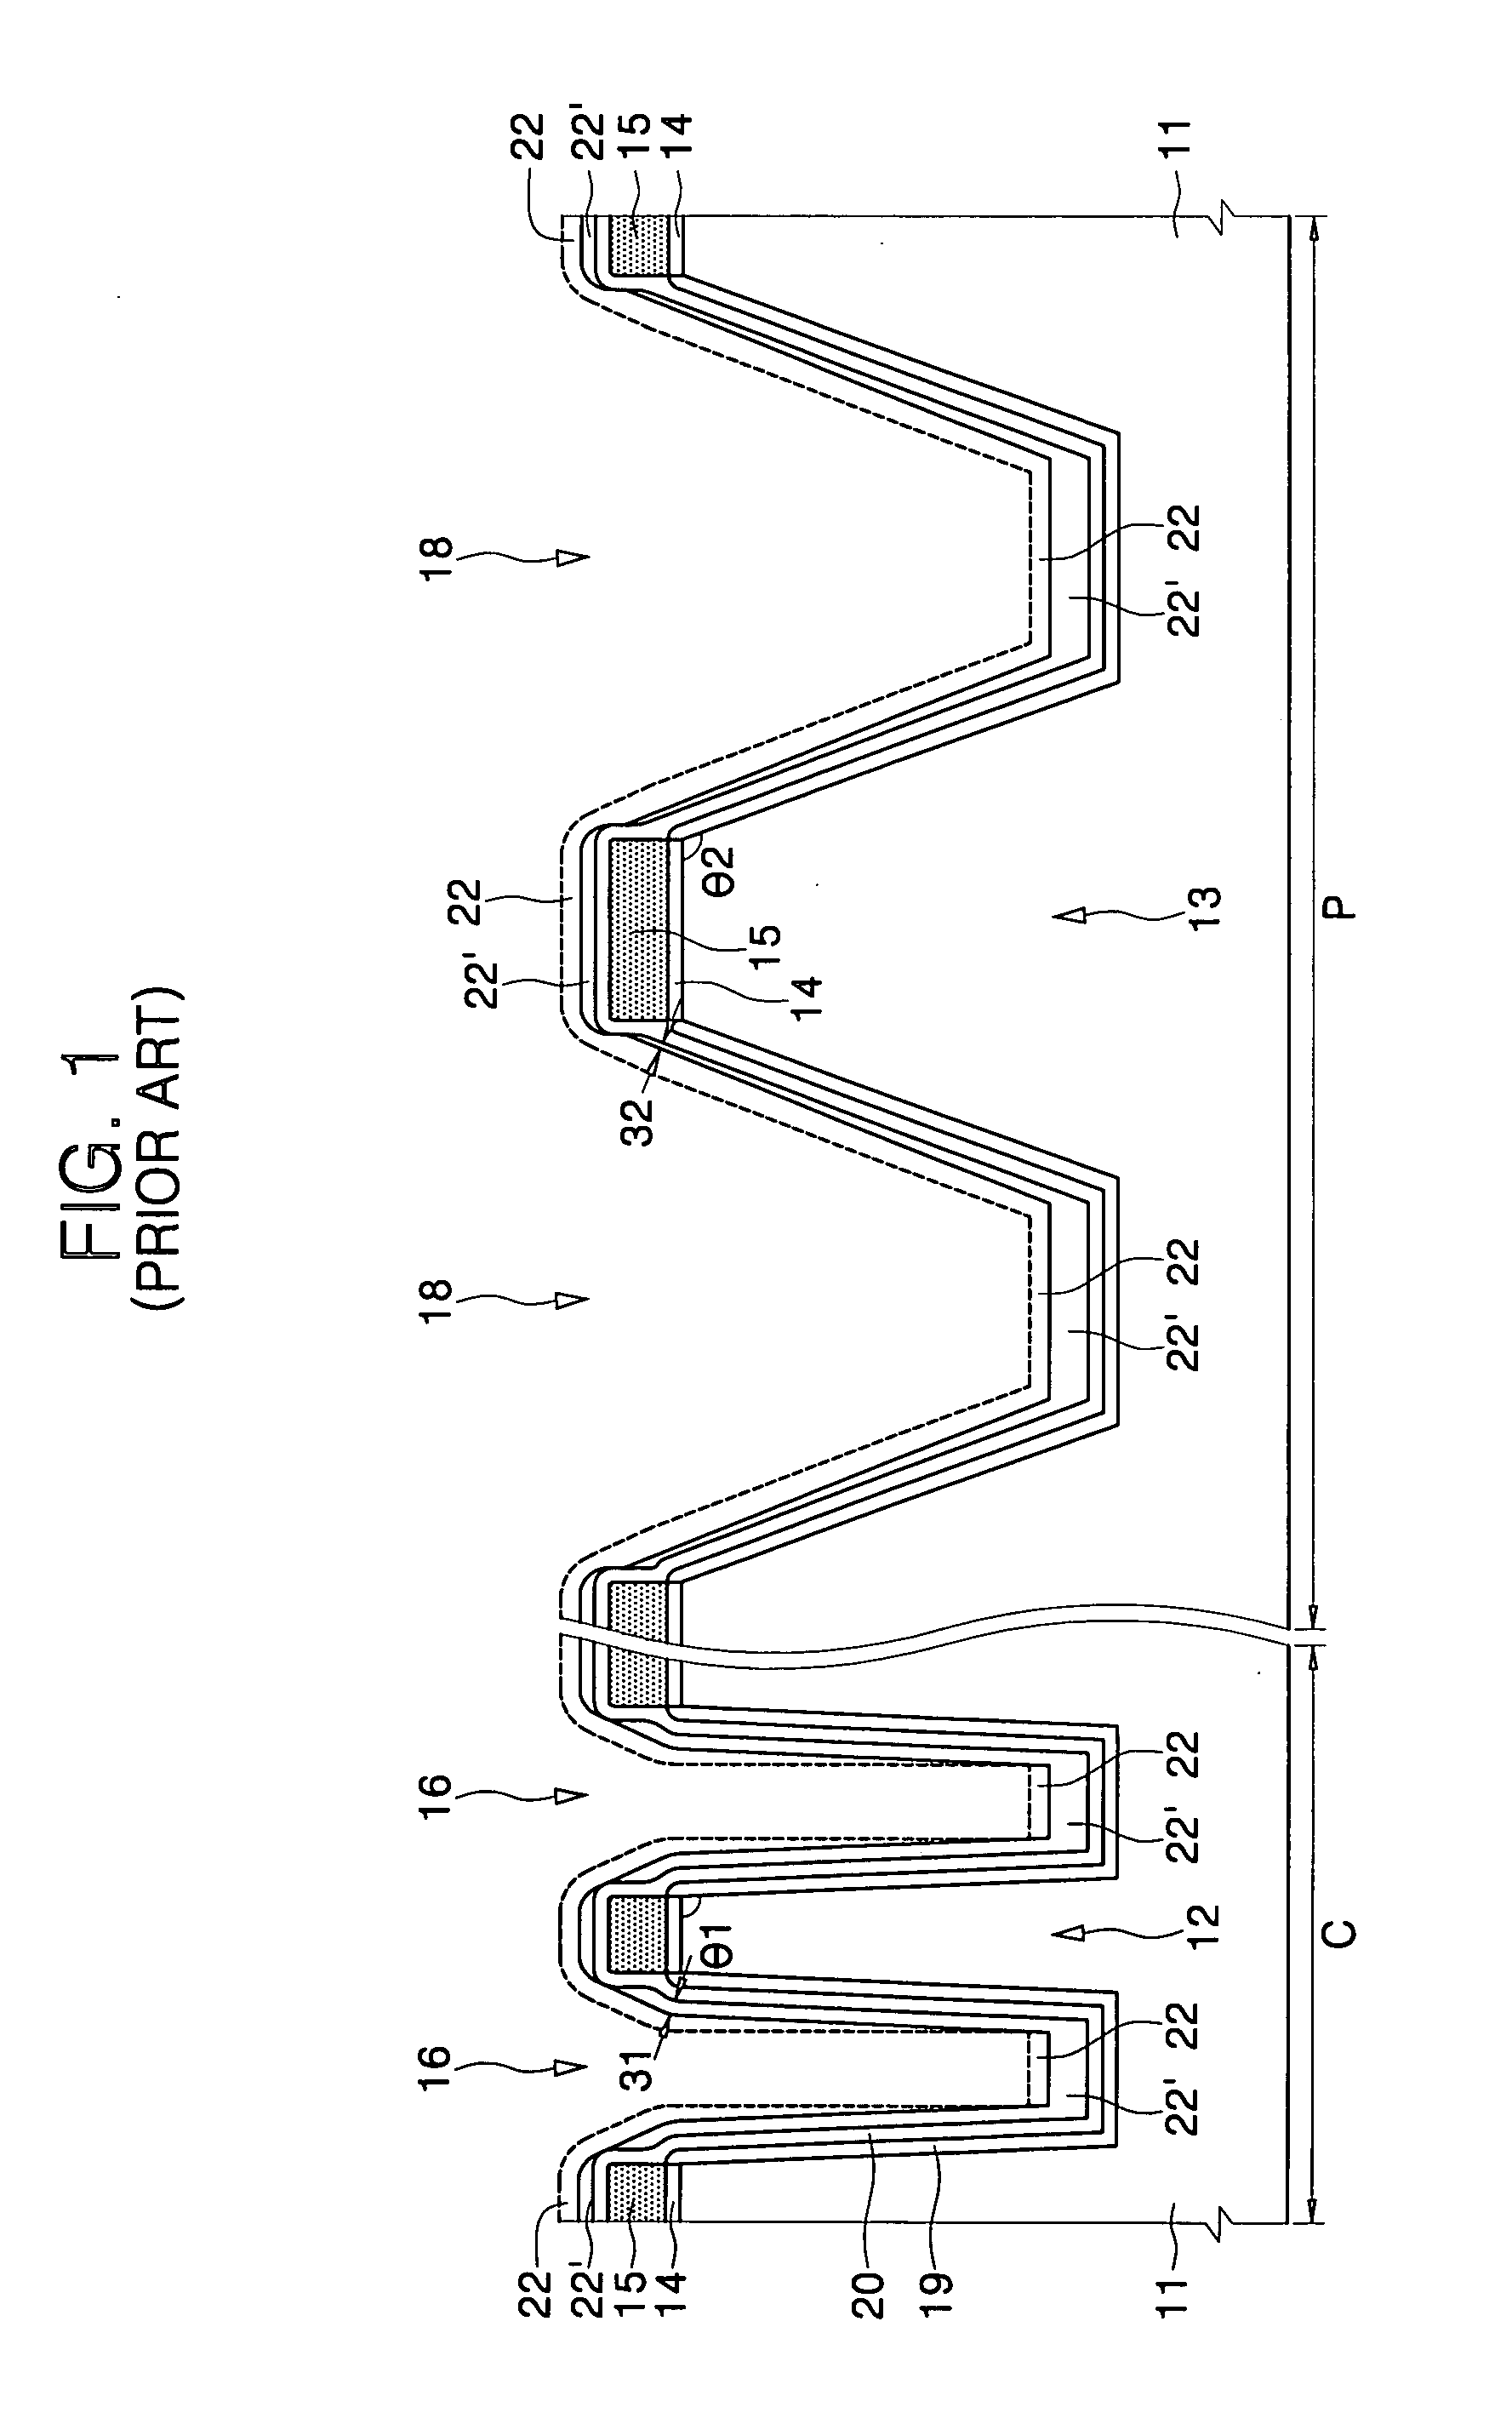 Semiconductor devices including trench isolation structures and methods of forming the same